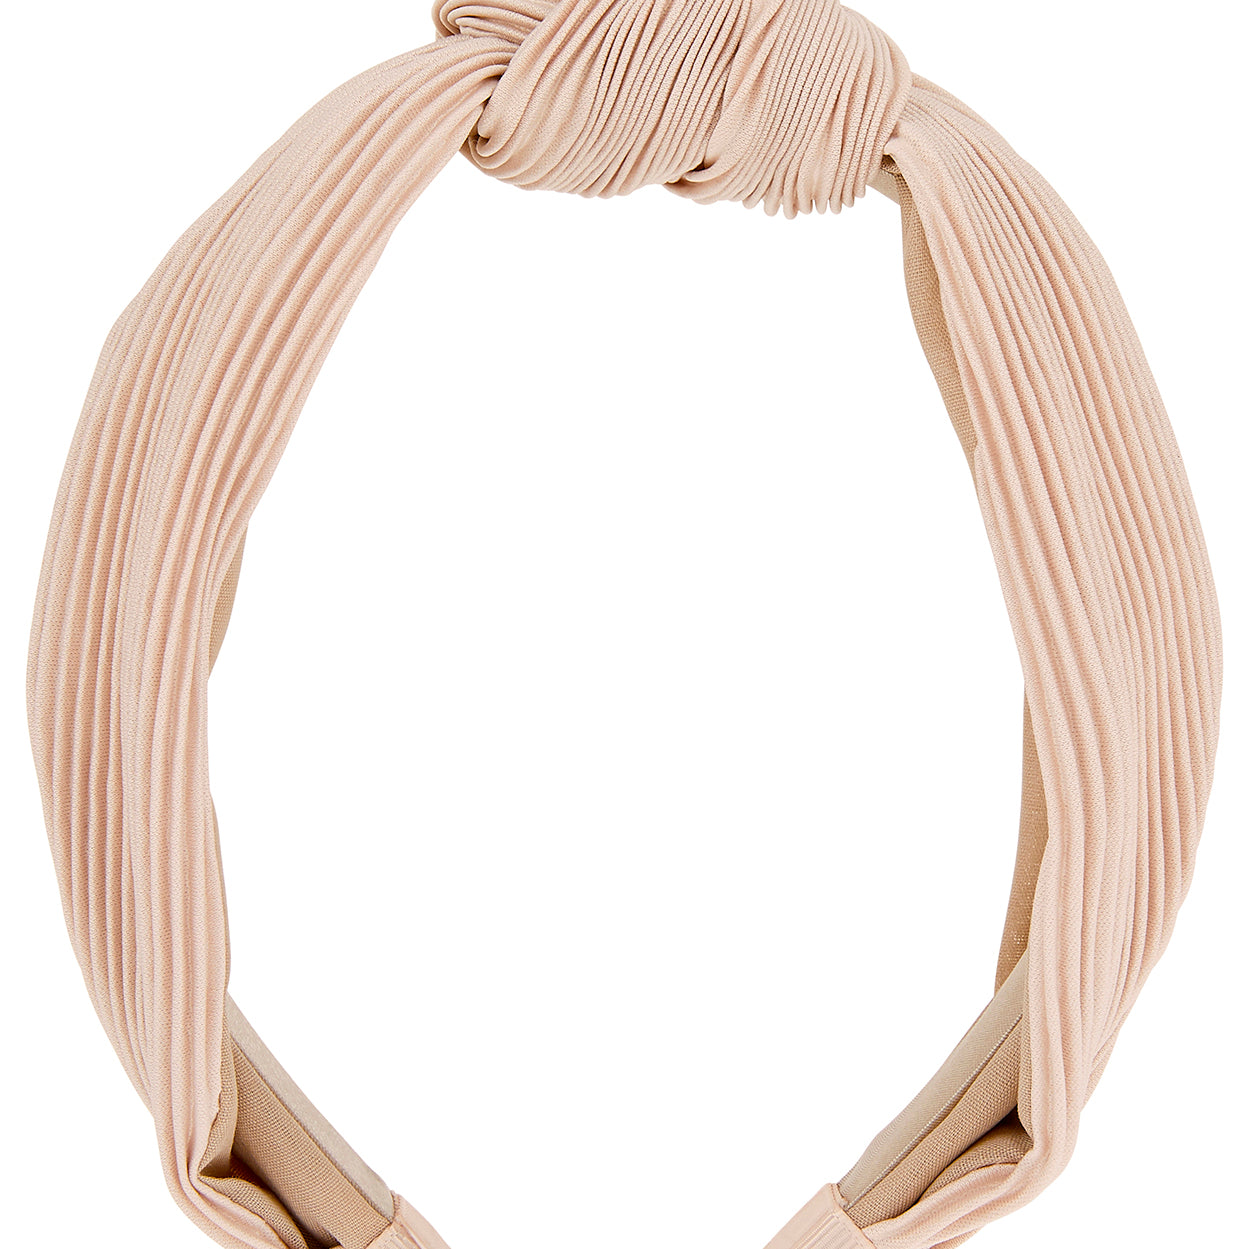 Accessorize London Women's Wide Pleated Knot Alice Band